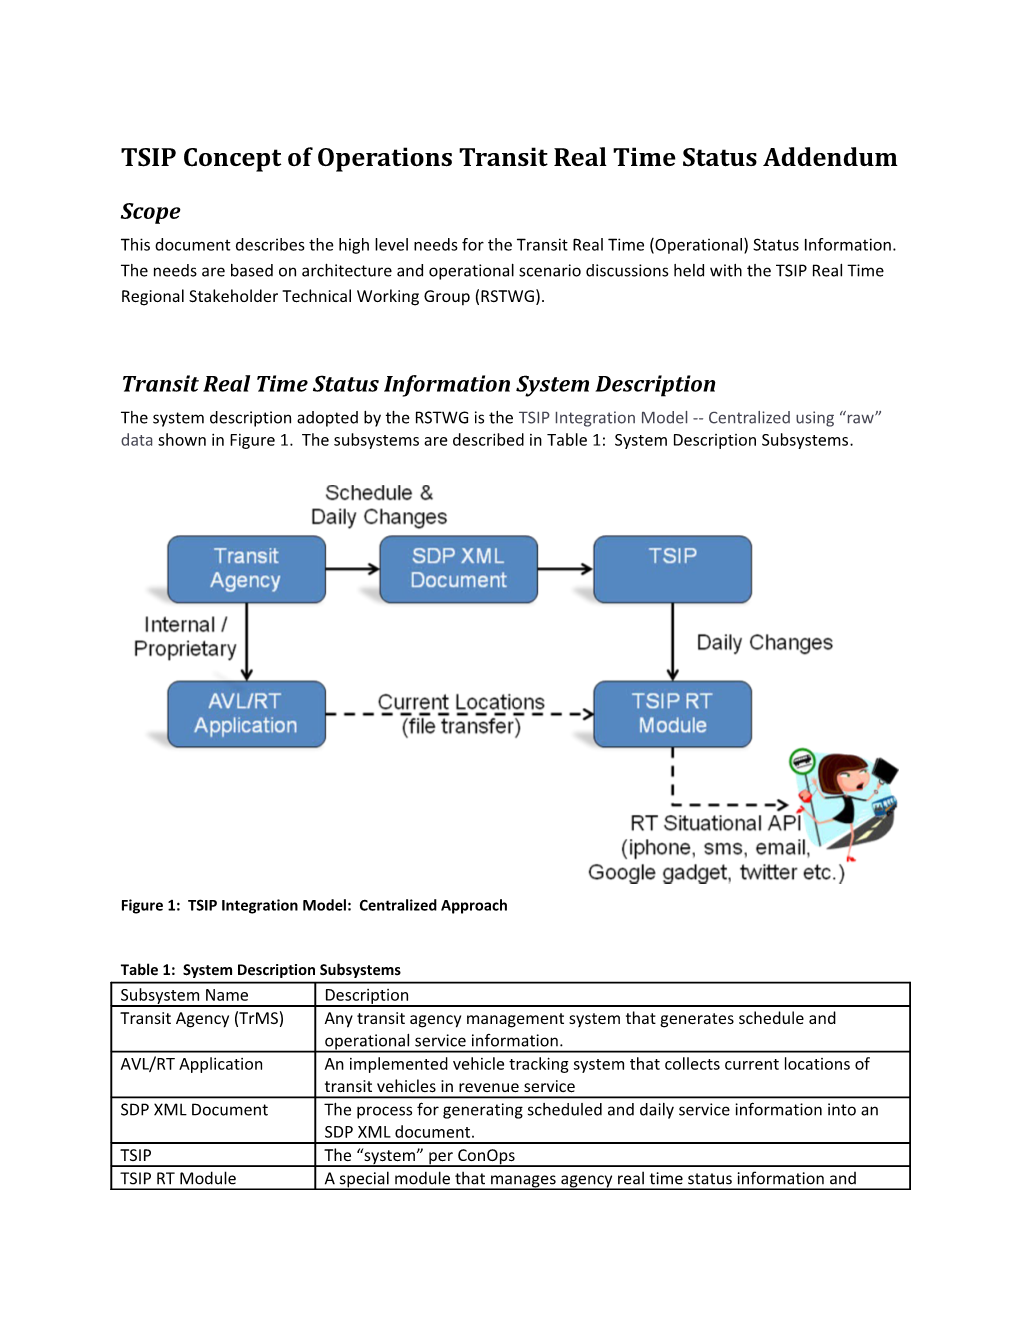 TSIP Concept of Operations Transit Real Time Status Addendum